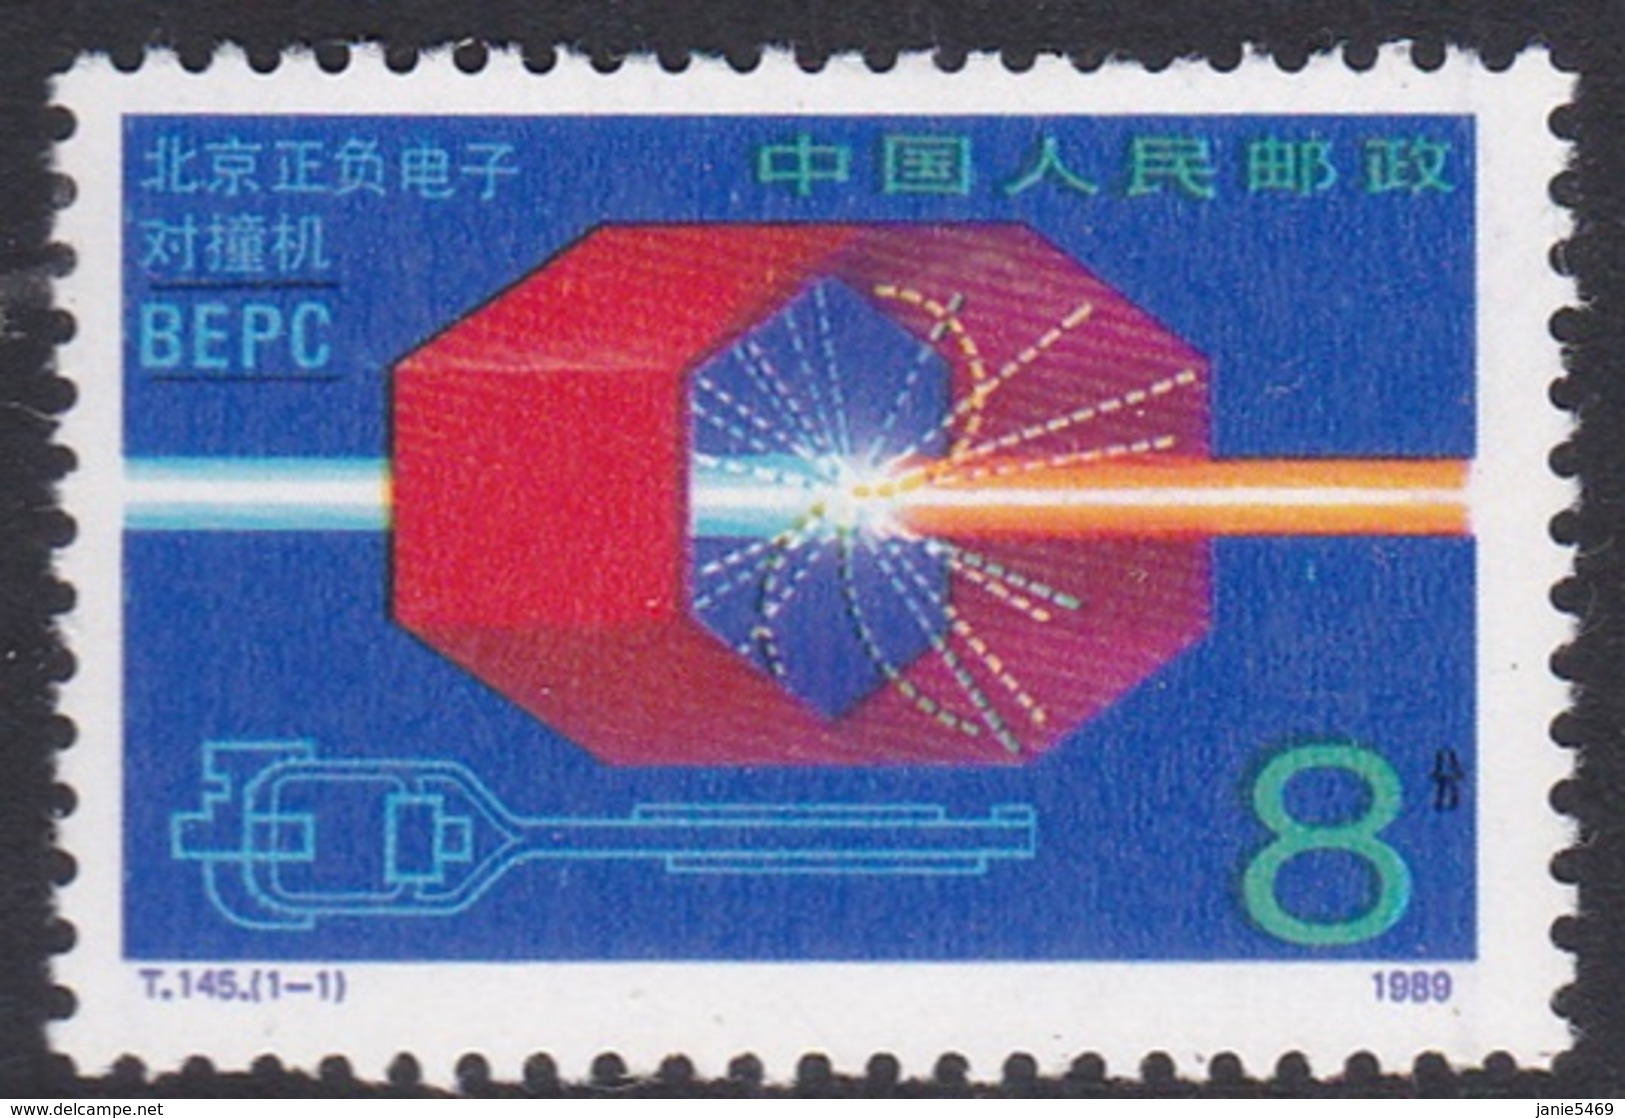 China People's Republic SG 3643 1989 Peking Electron Positron Collider, Mint Never Hinged - Unused Stamps